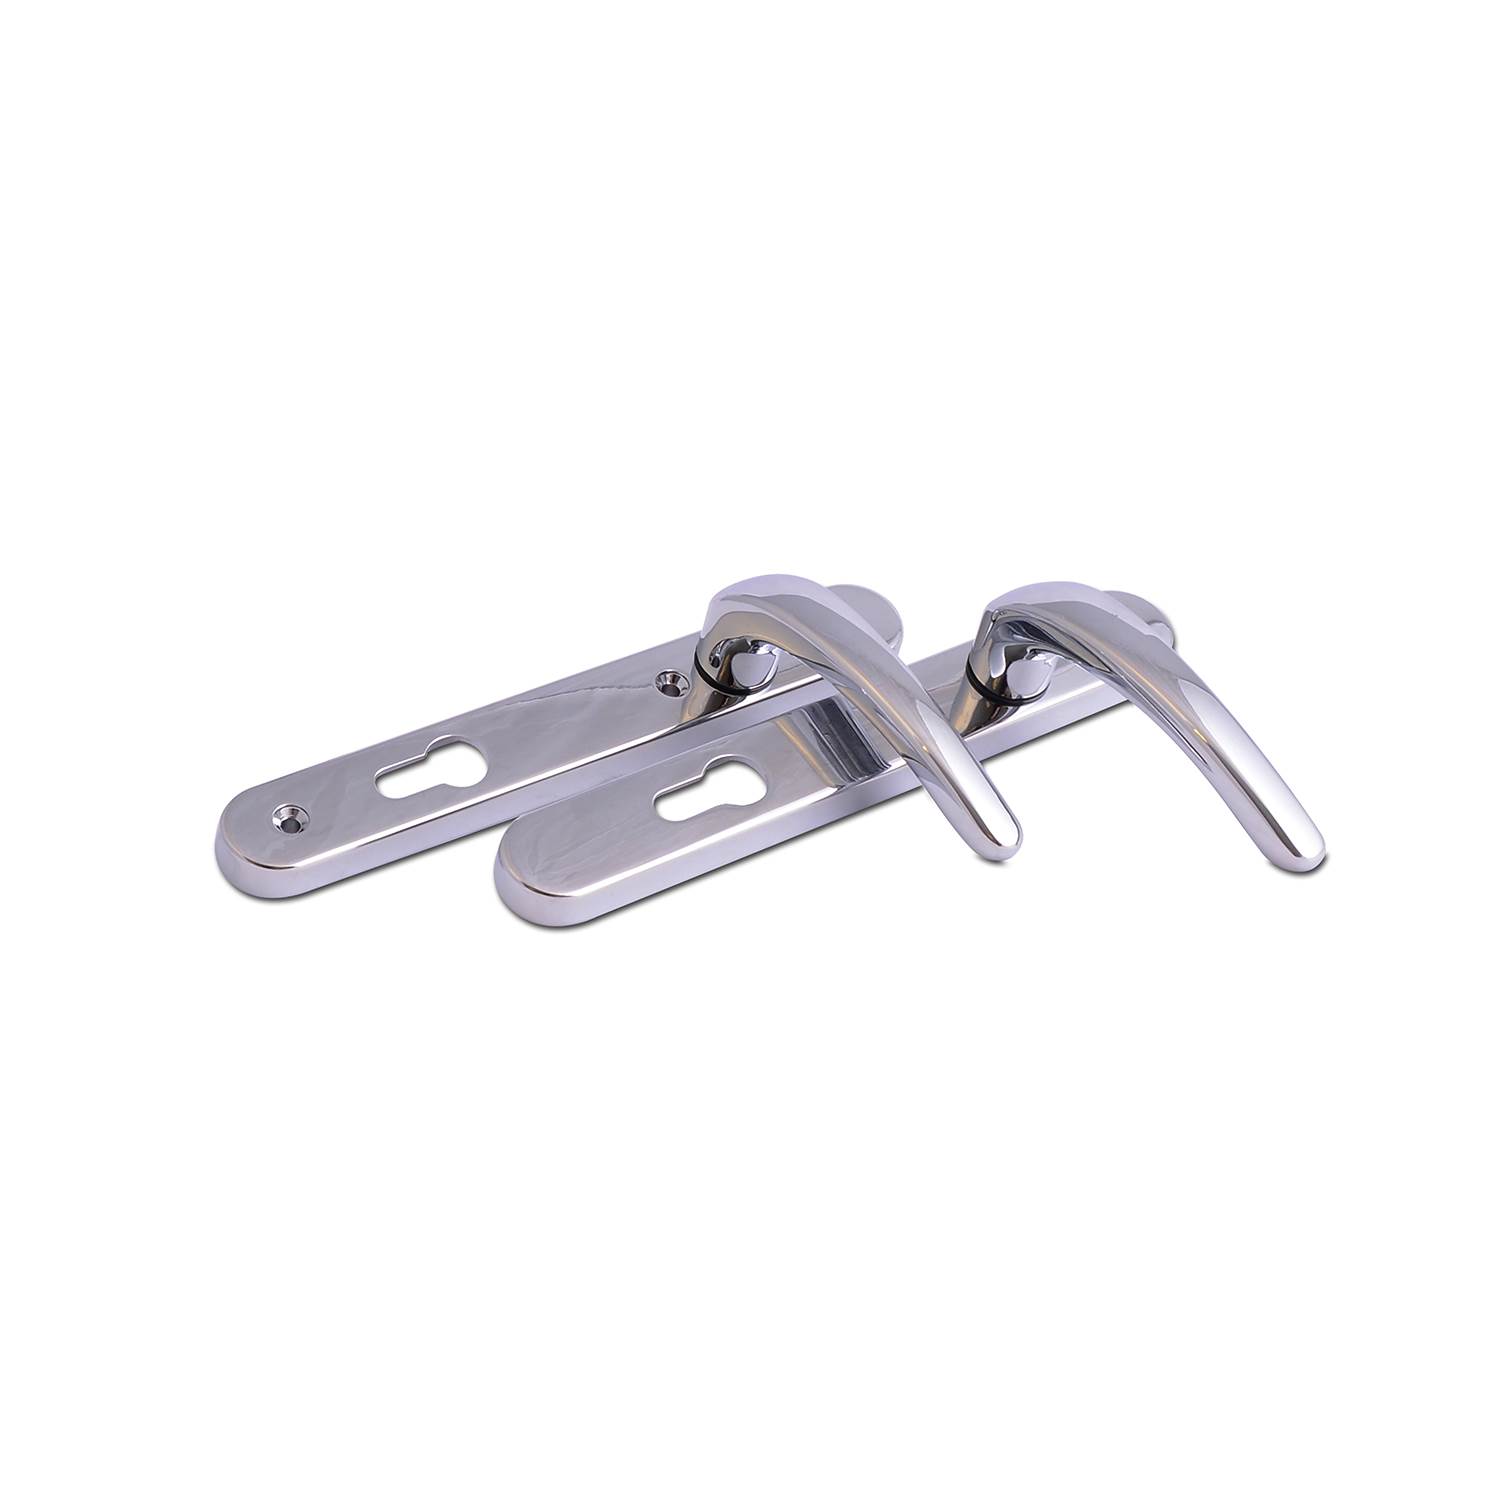 Multipoint Handles